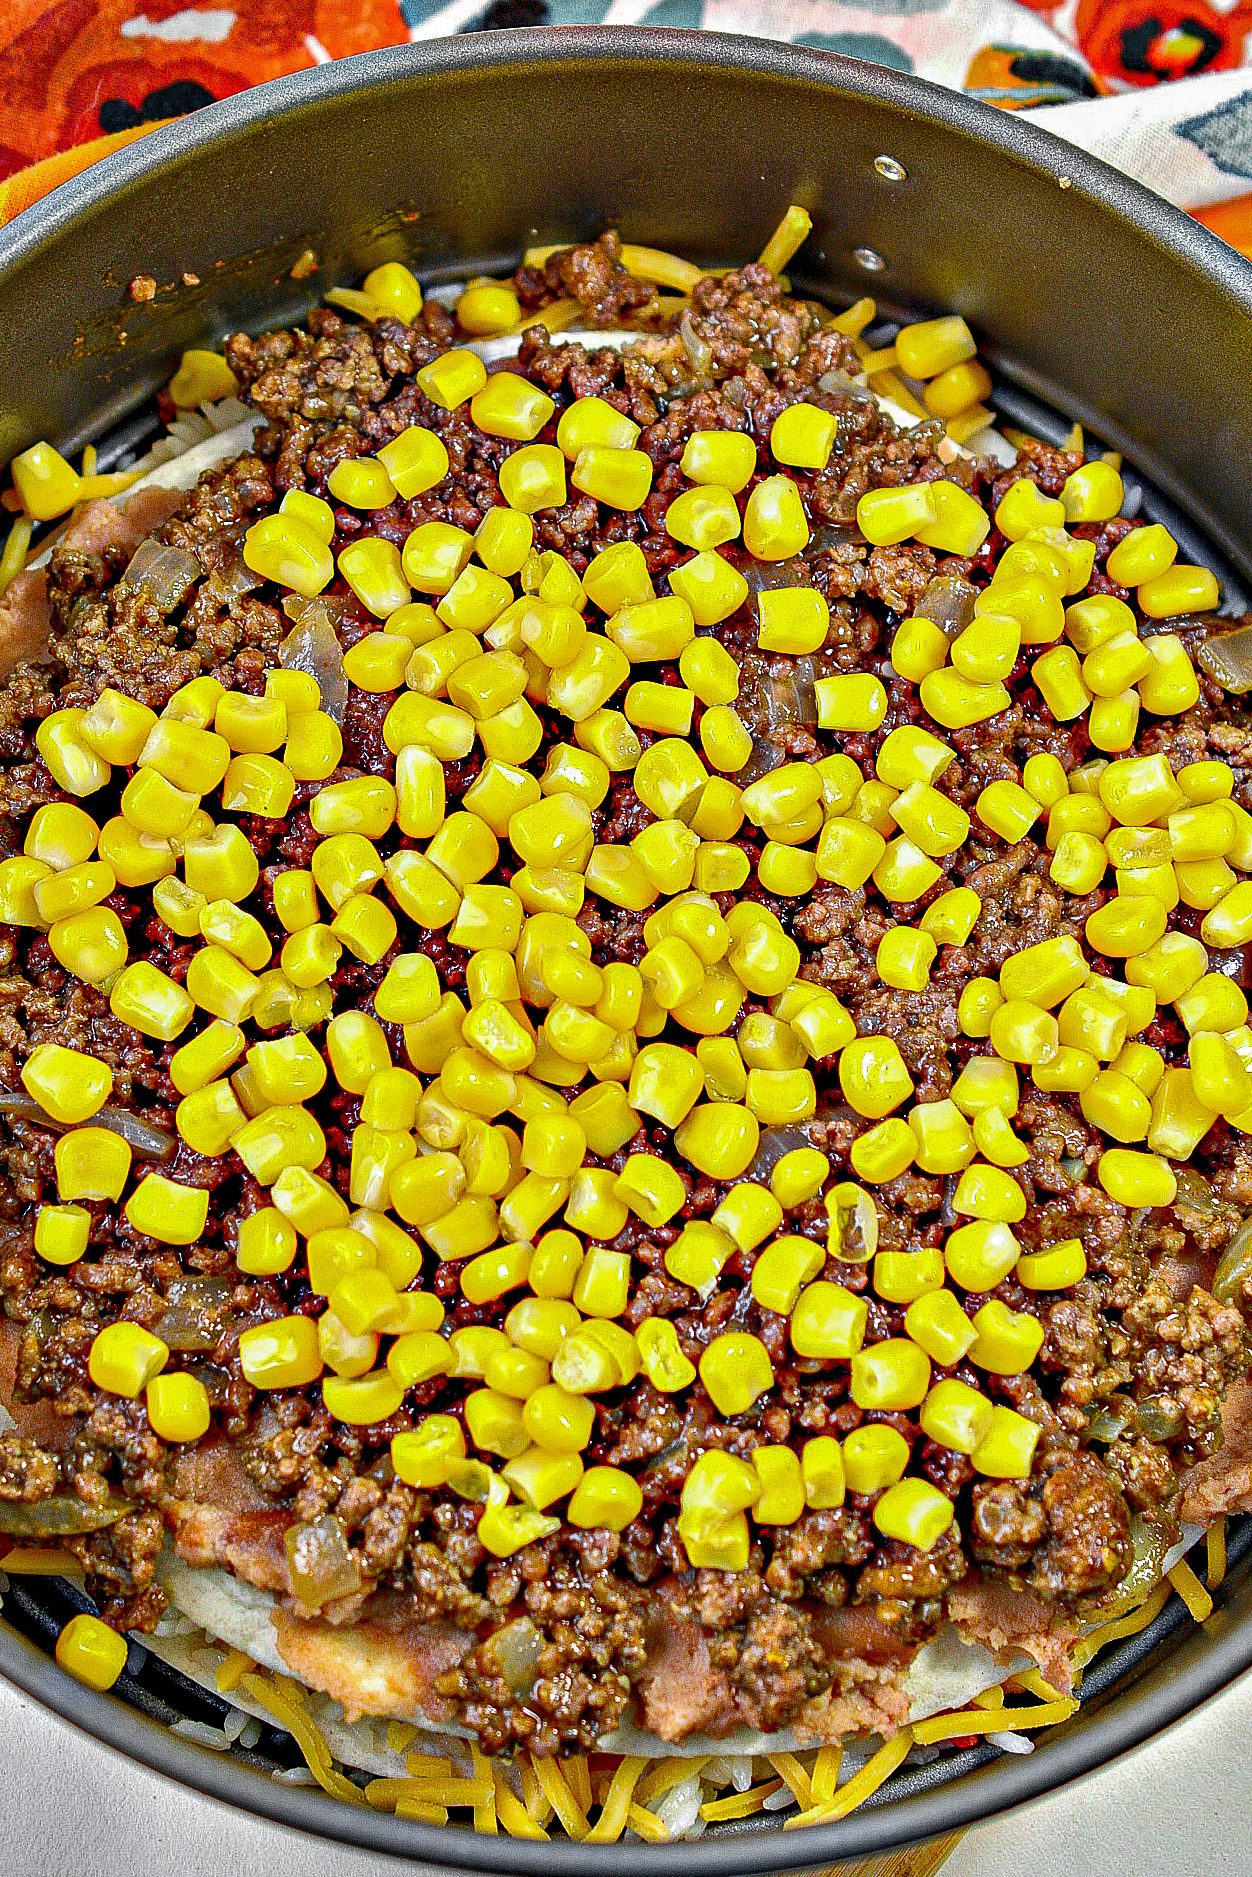 Tortilla, ⅓ of the beans, ½ of the meat, ½ the corn and sprinkling of cheese.